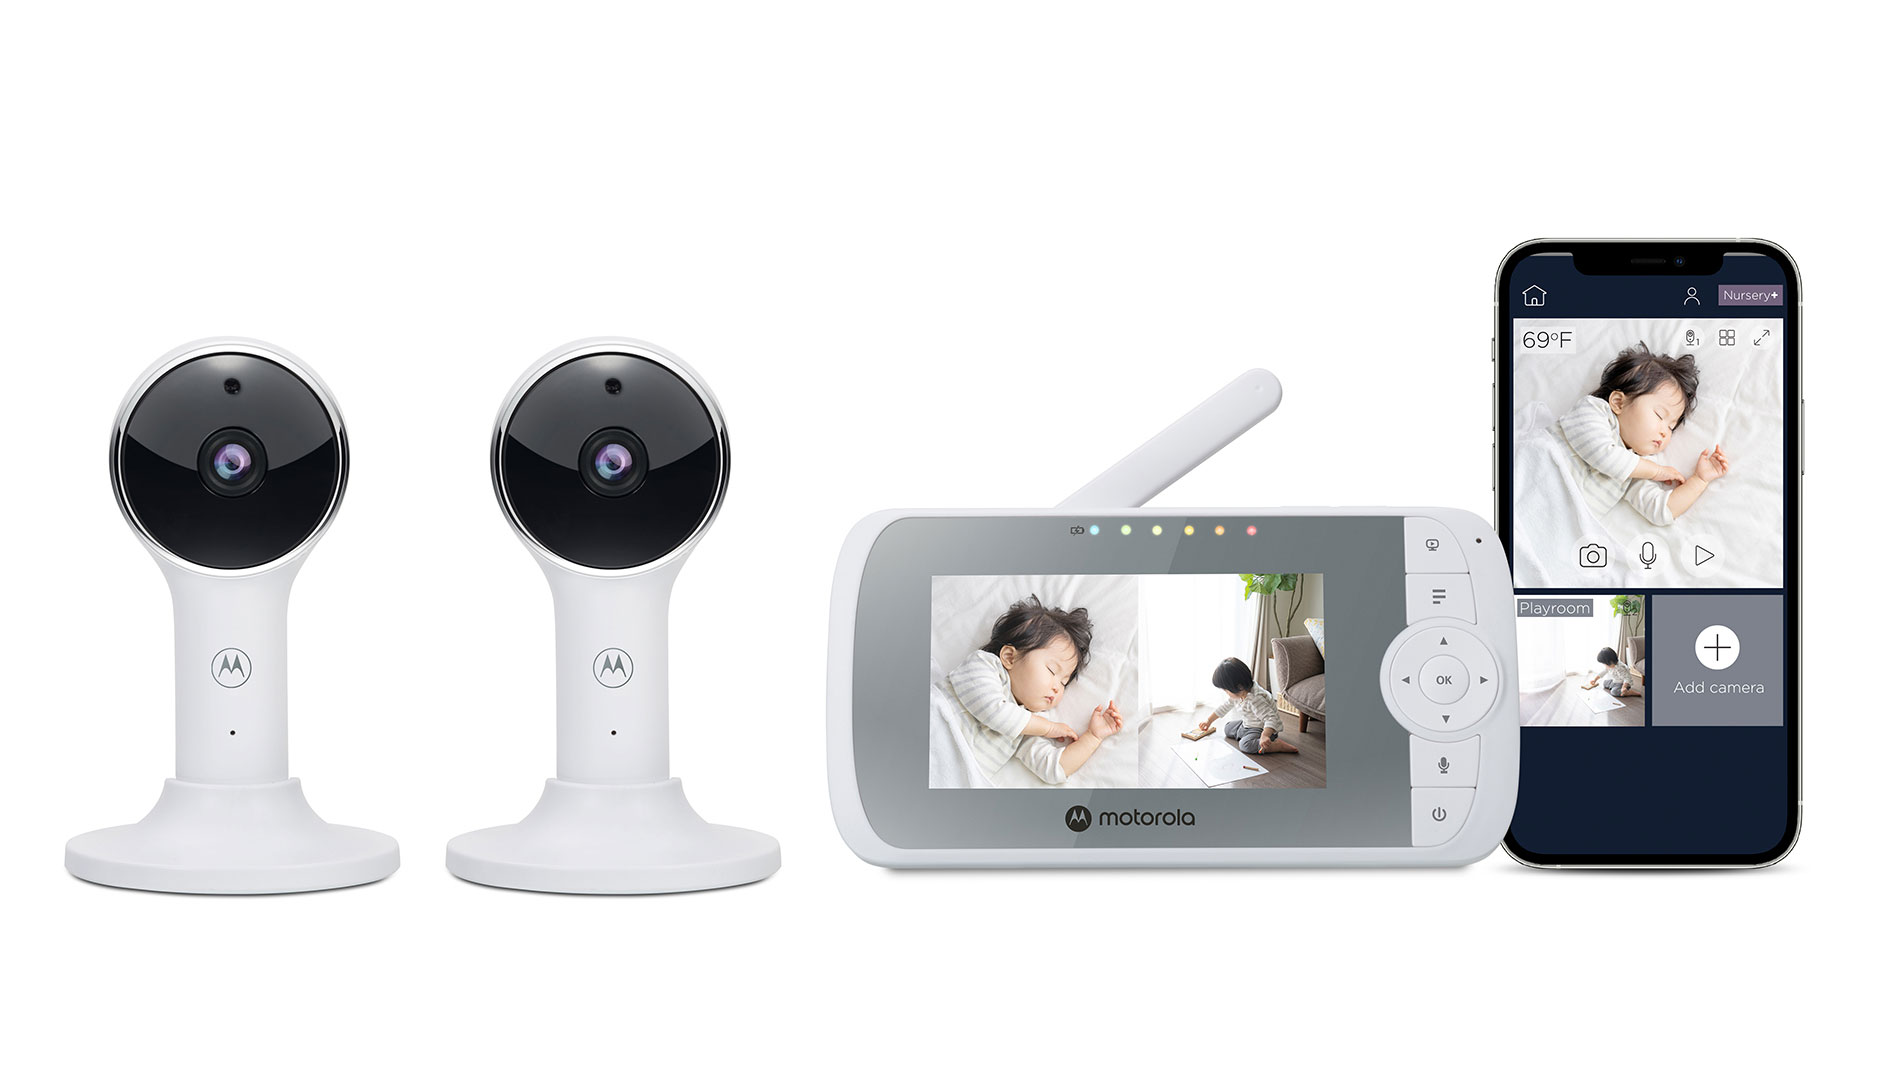 VM64-2 CONNECT - 2 camera split screen connected video baby monitor - Product image